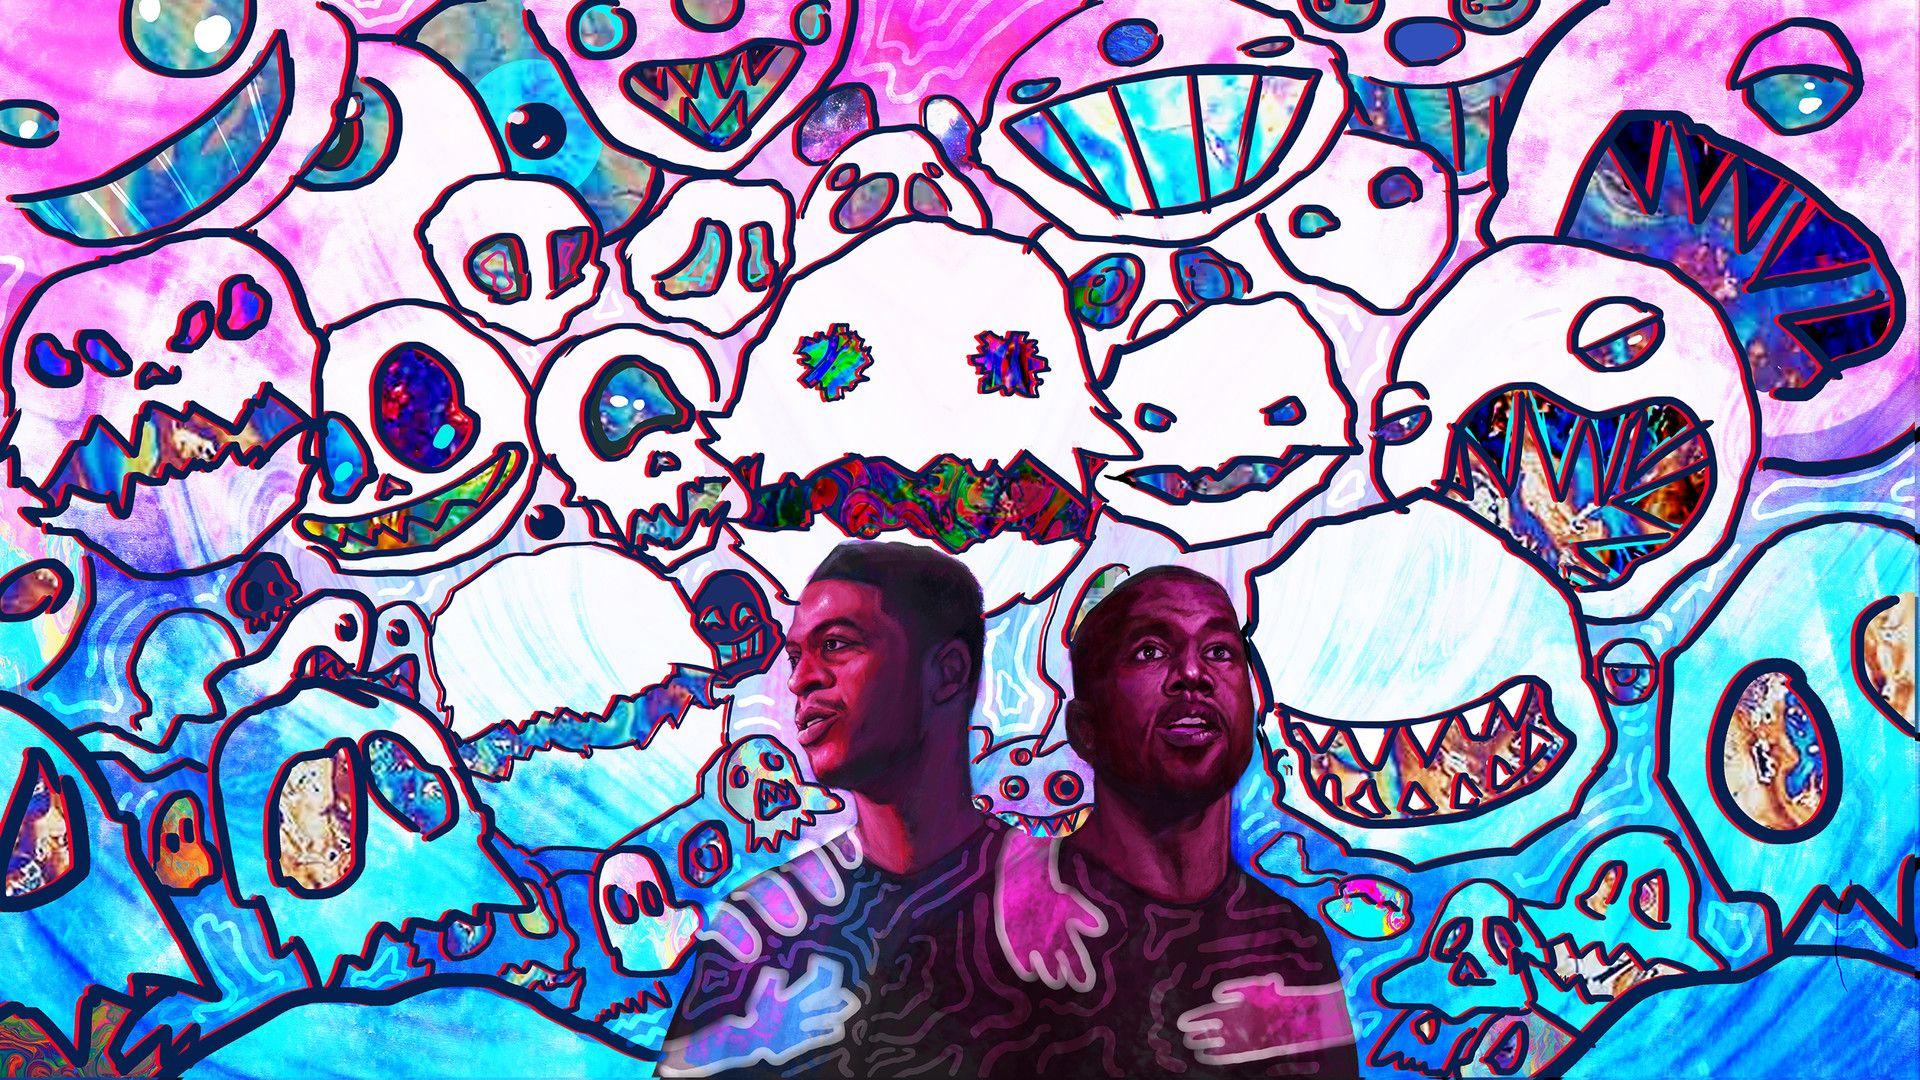 Kids See Ghosts Wallpapers - Wallpaper Cave